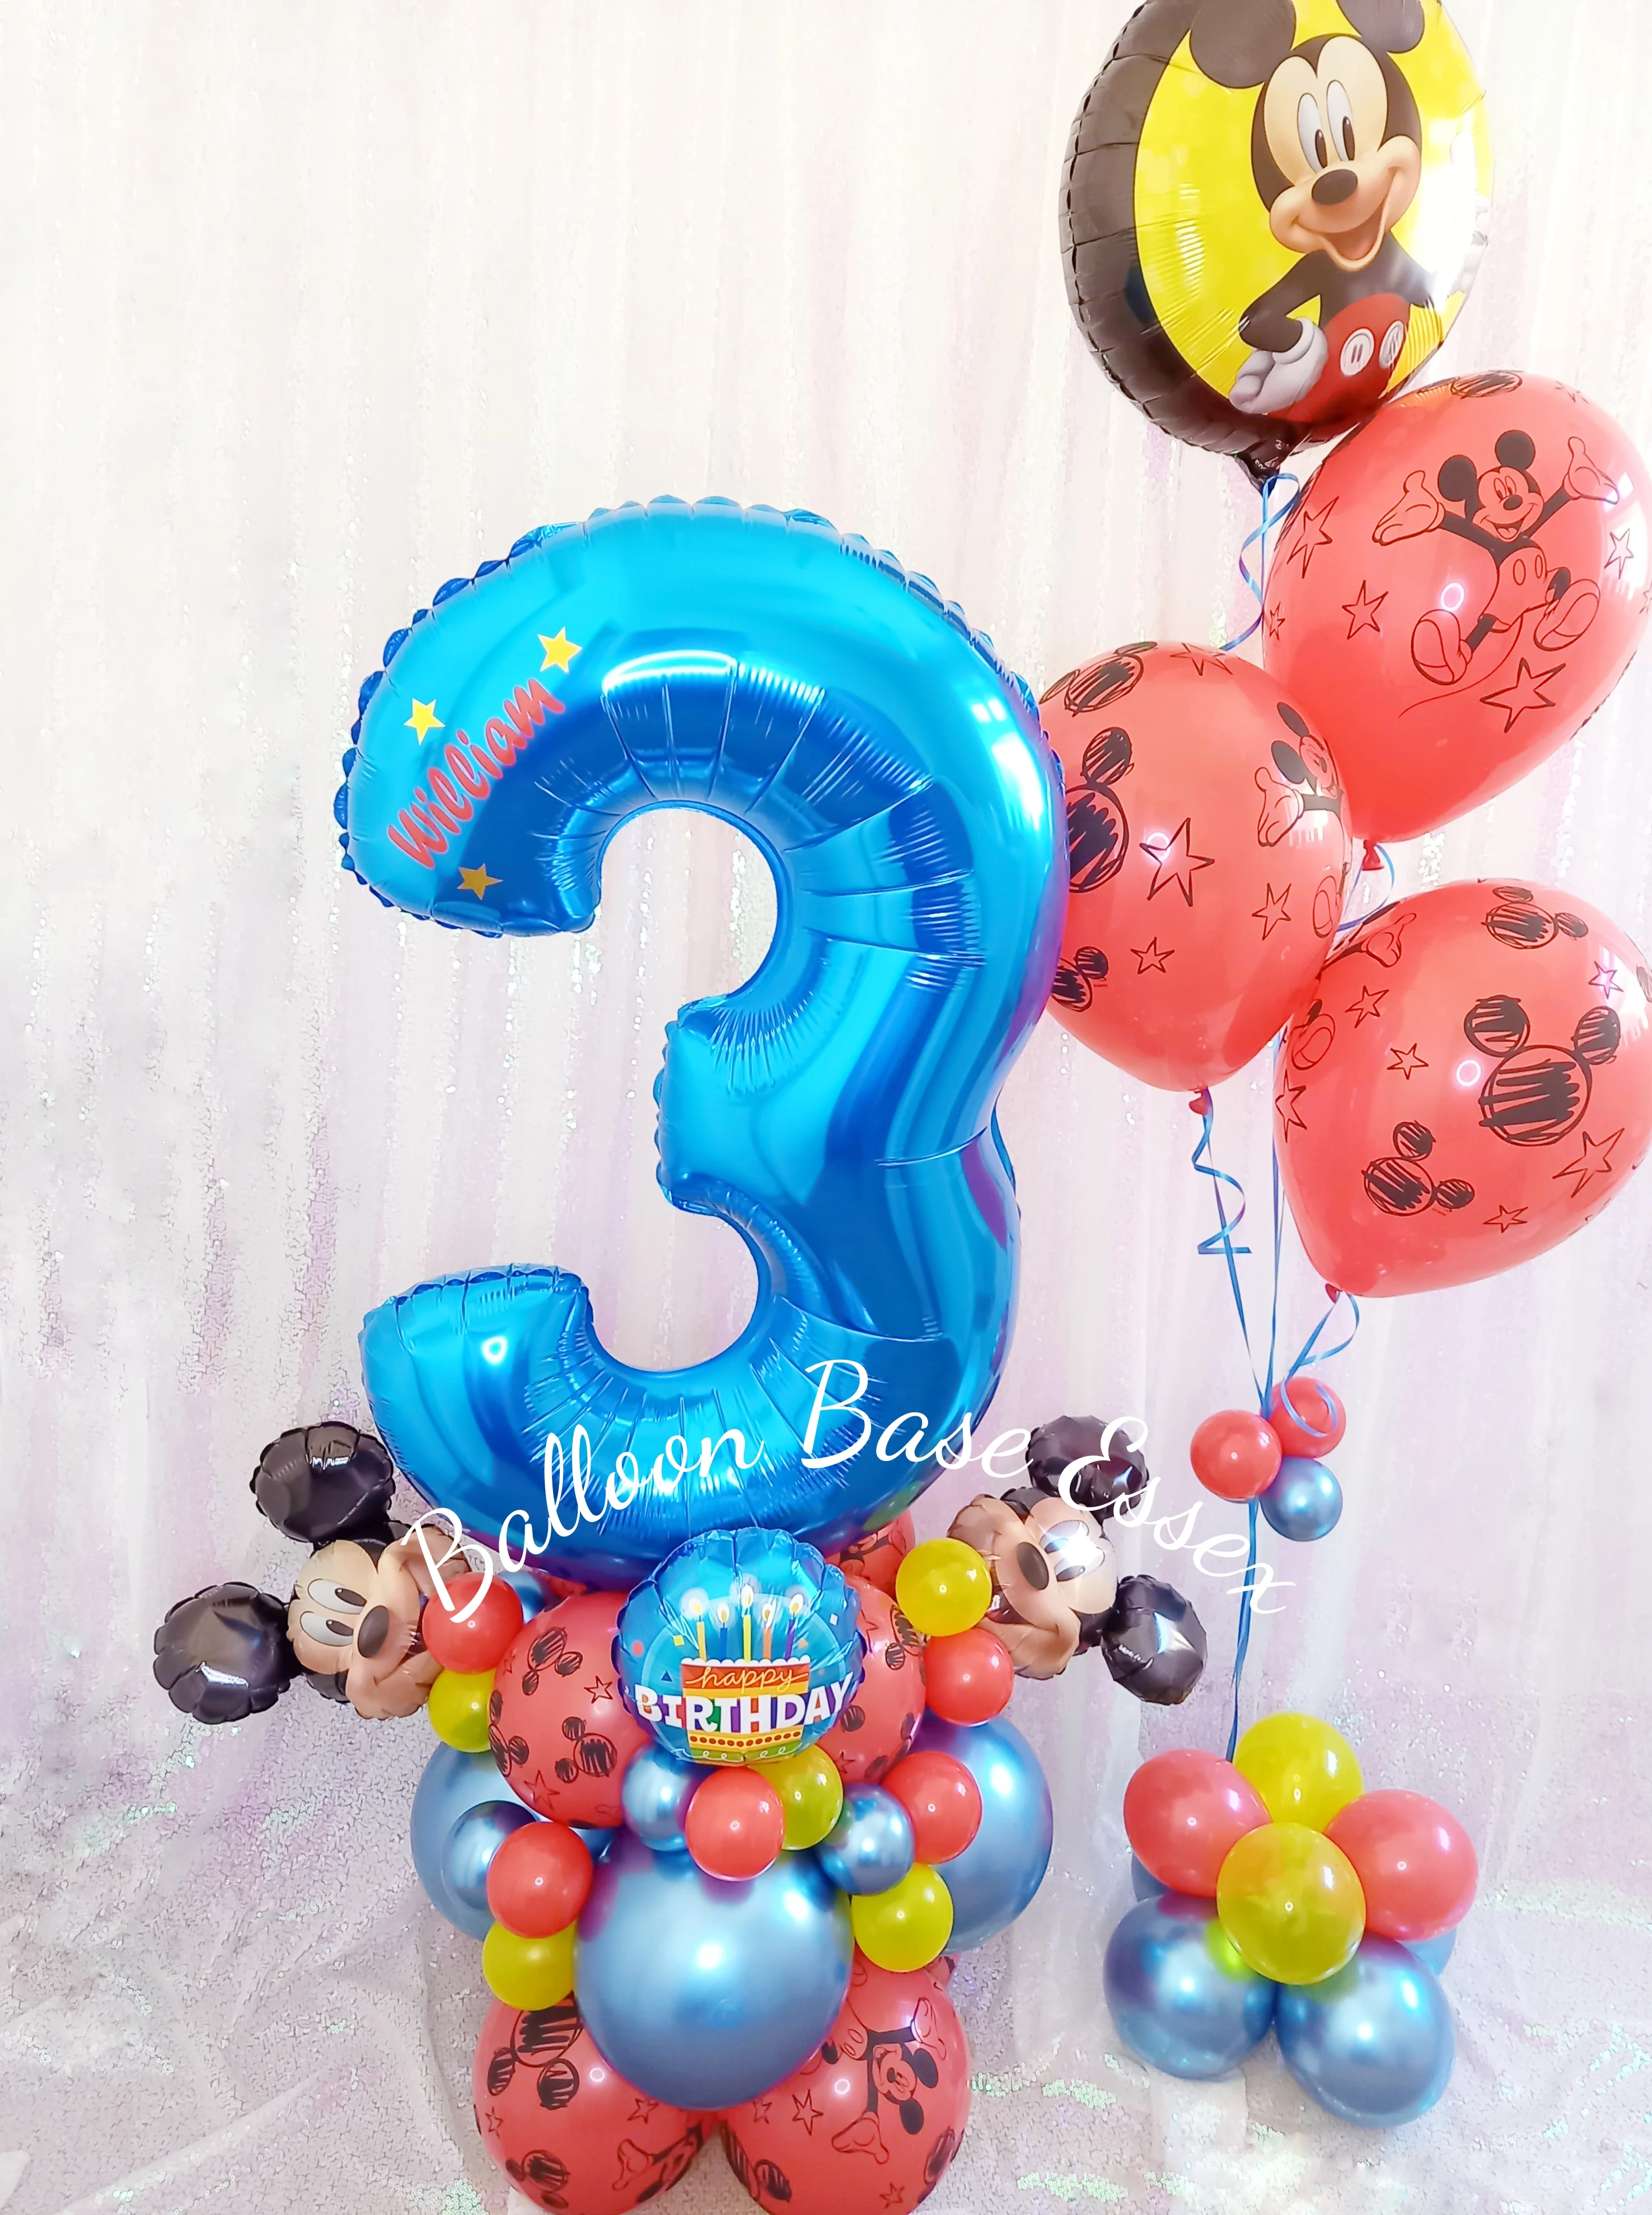 Mickey Mouse theme 3rd birthday balloons with large blue number 3 balloon